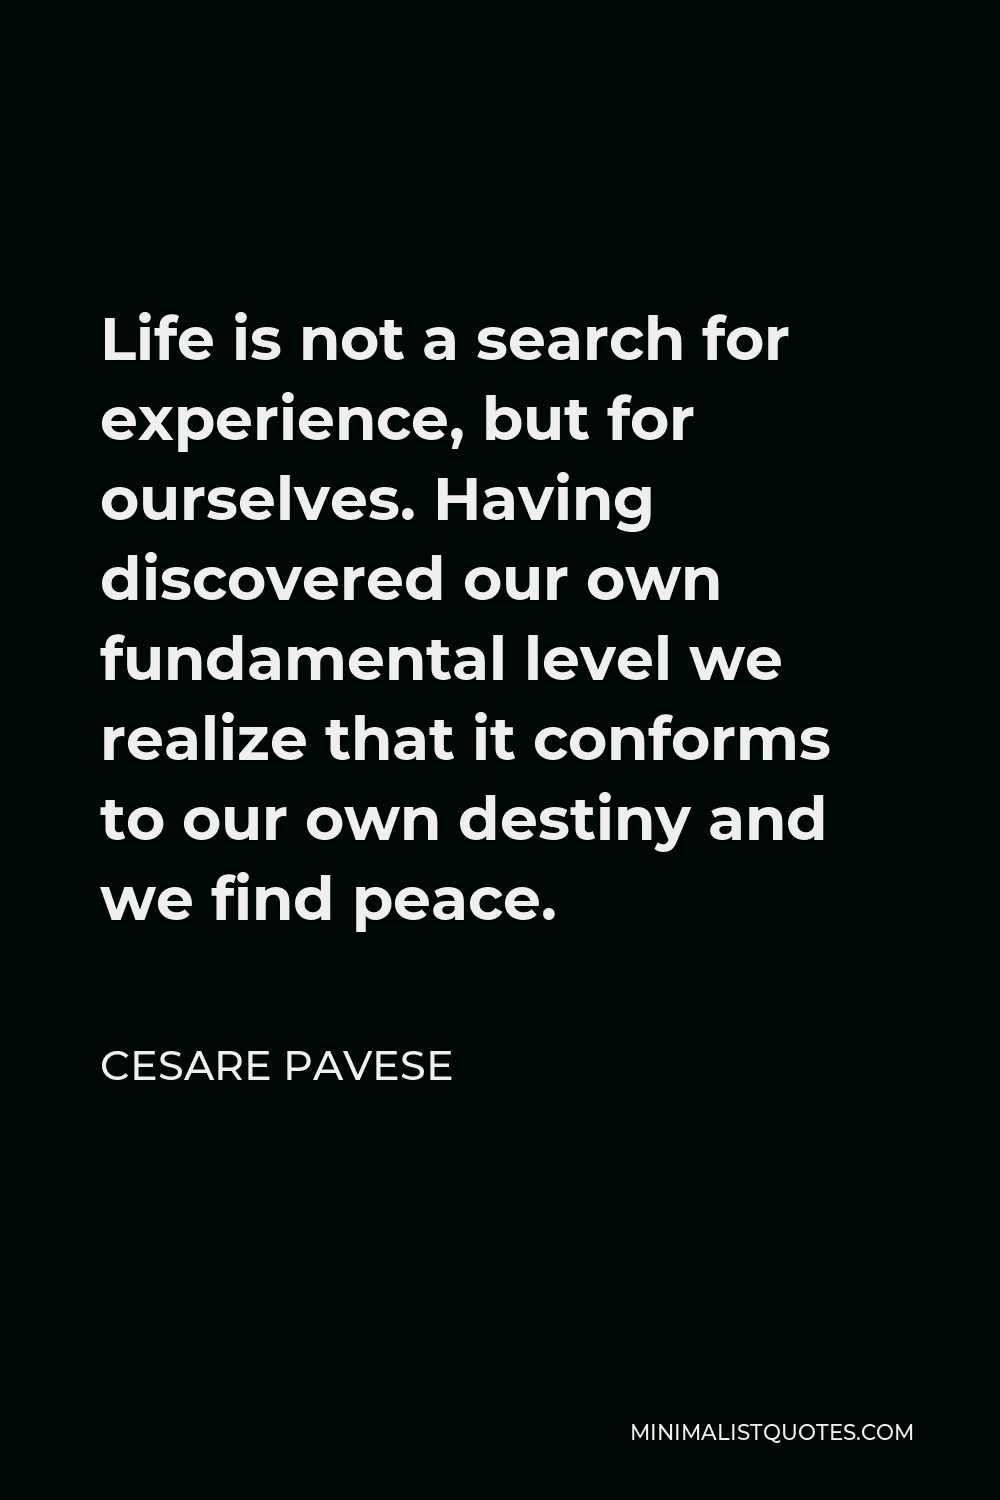 Cesare Pavese Quote - Life is not a search for experience, but for ourselves. Having discovered our own fundamental level we realize that it conforms to our own destiny and we find peace.